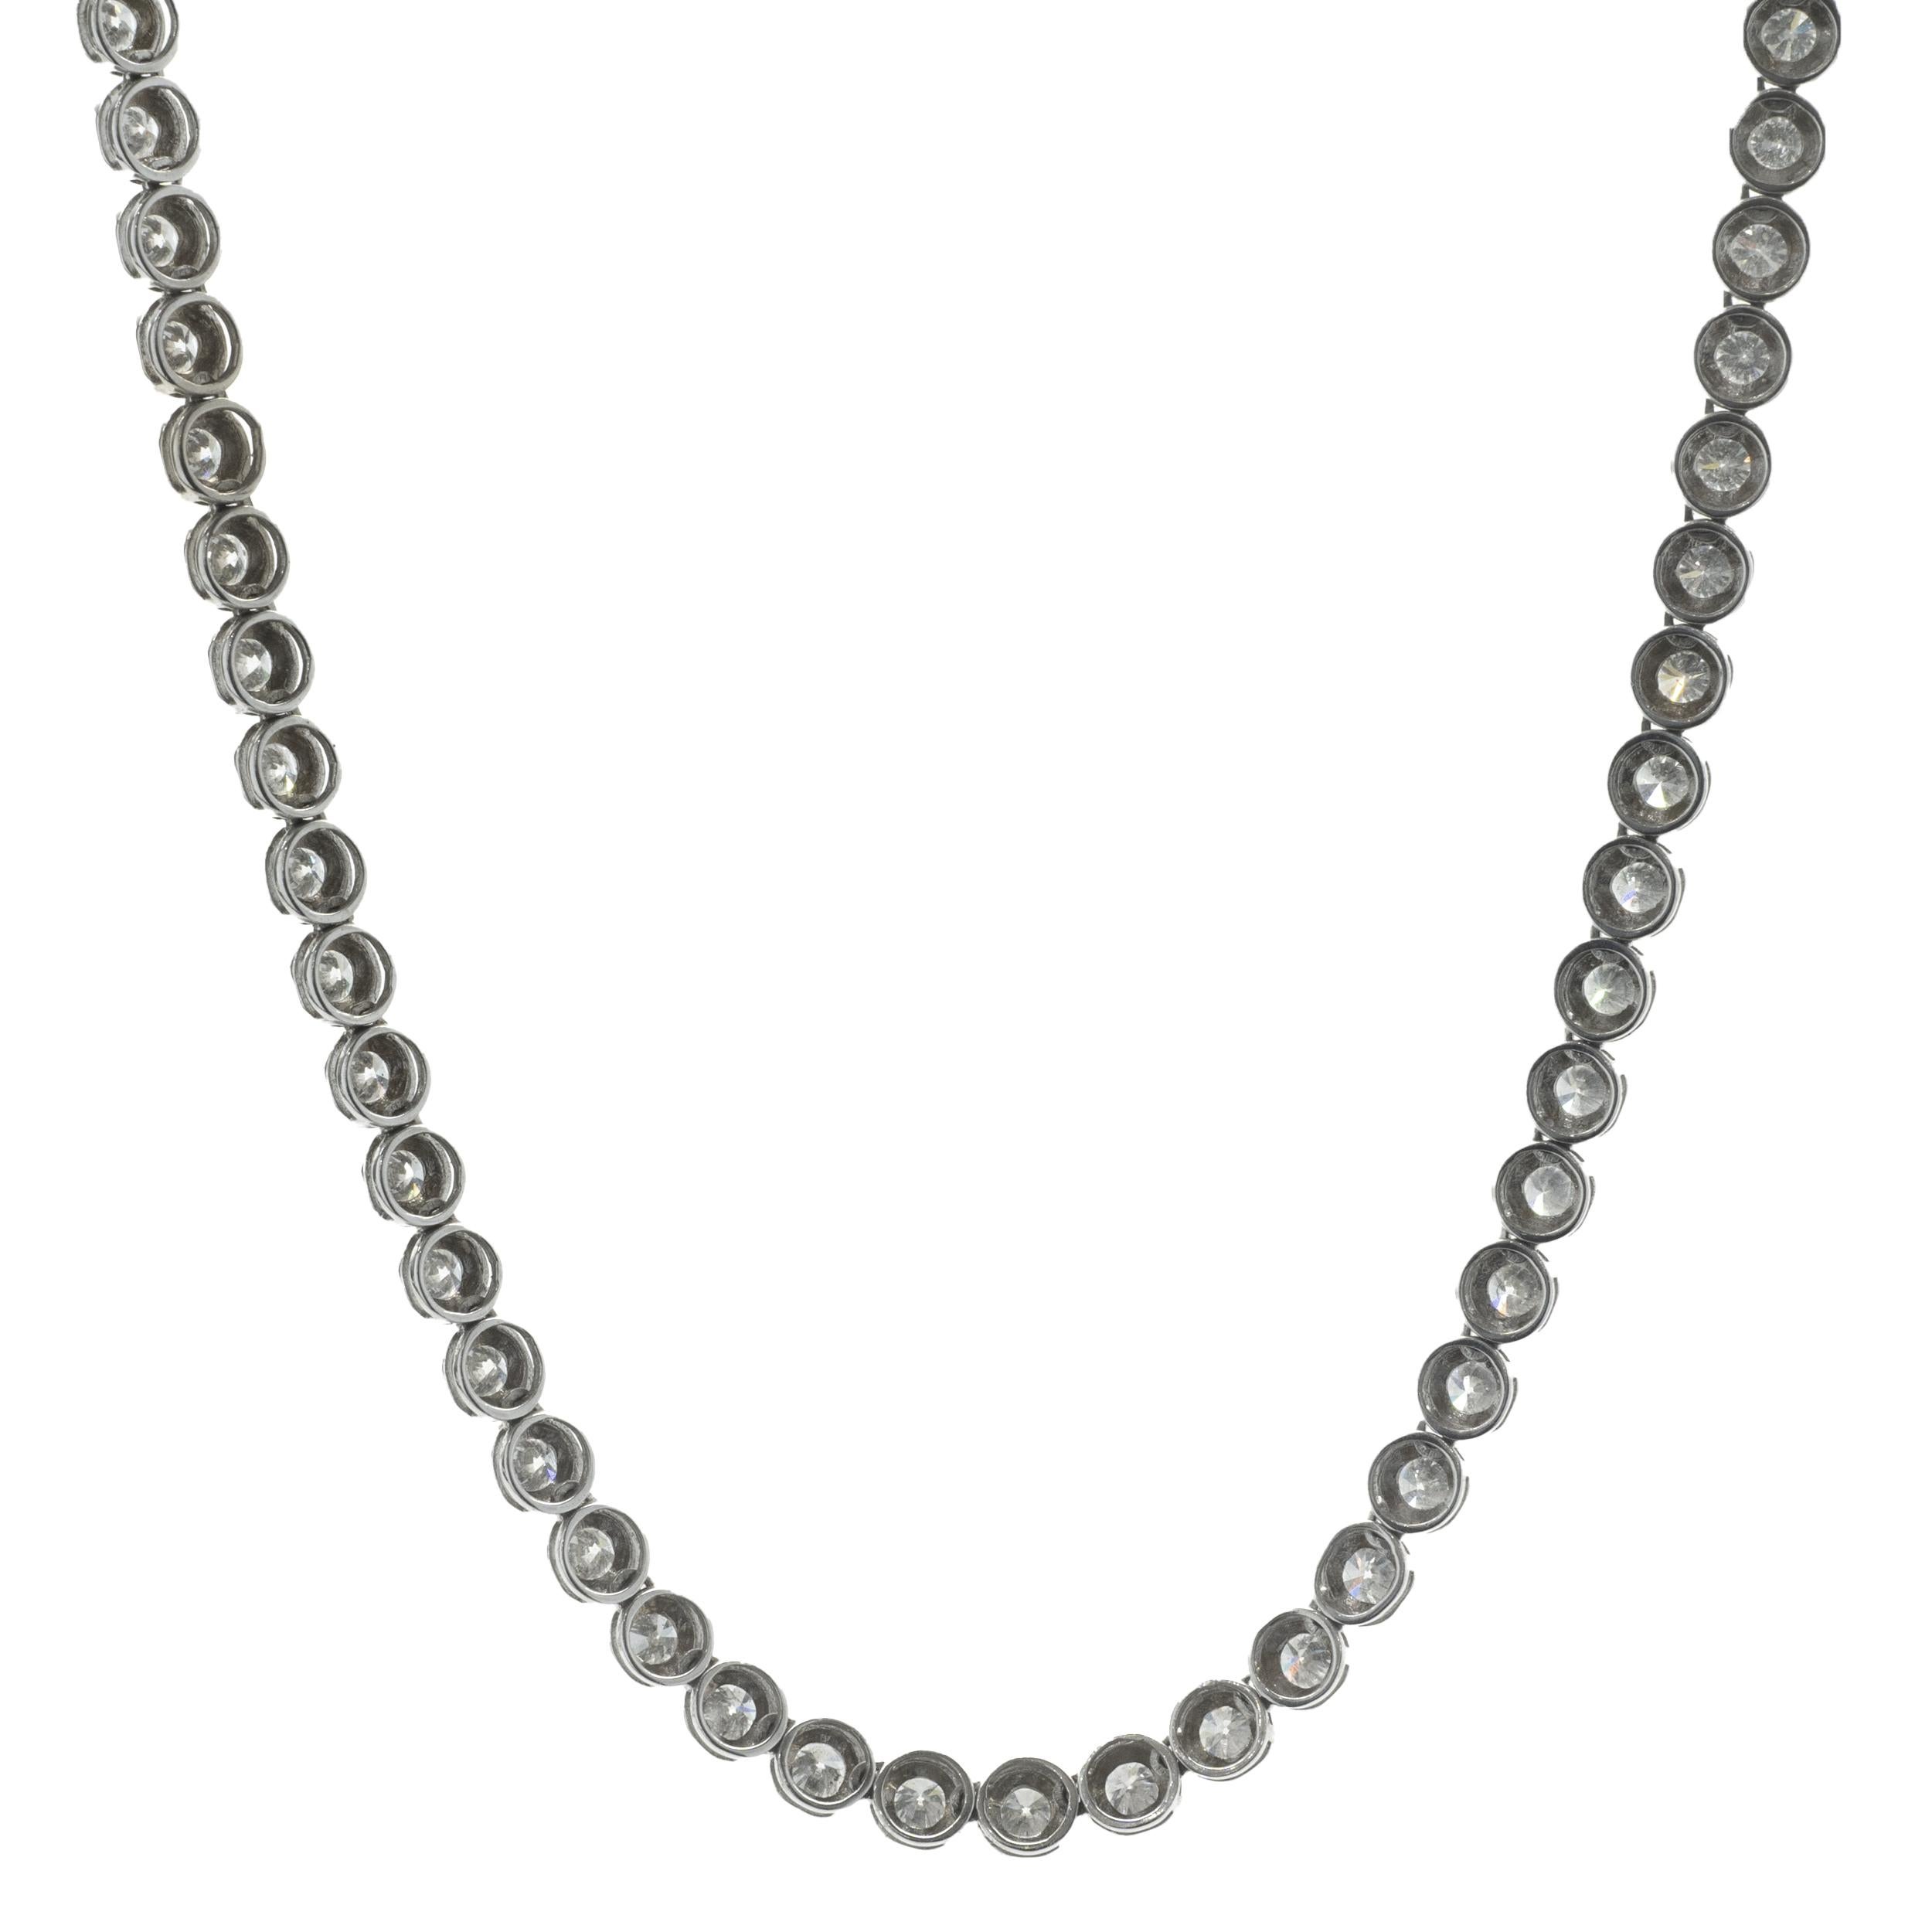 Designer: custom design
Material: 14K White Gold 
Diamond: 114 round brilliant cut = 12.51cttw
Color: G/H
Clarity: VS2-SI1
Dimensions: necklace measures 20-inches in length
Weight: 19.97 grams
